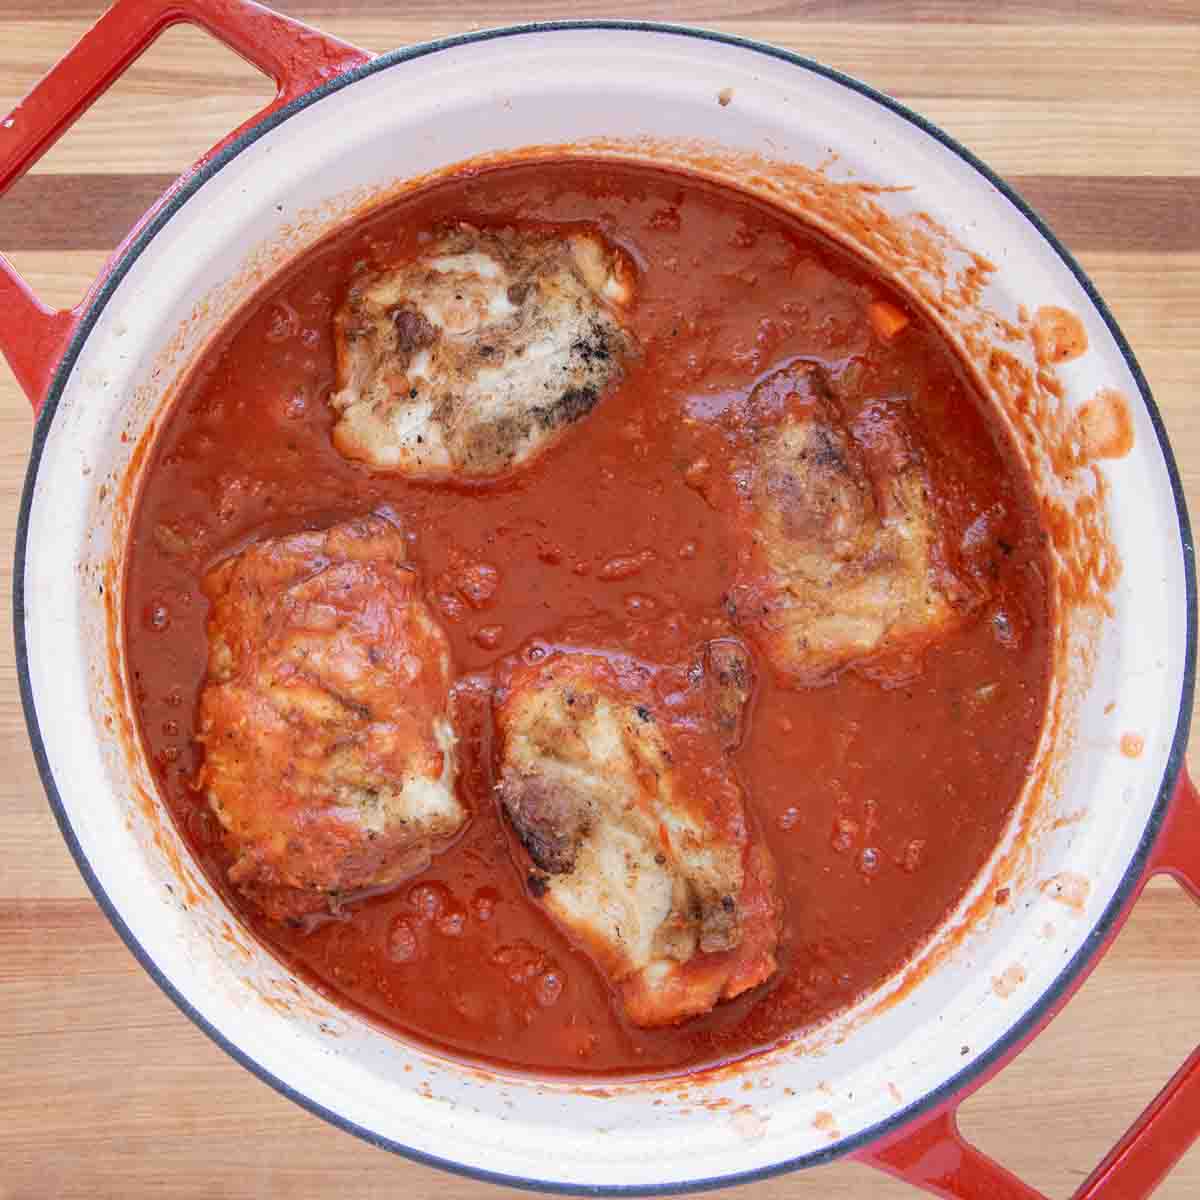 seared pork shanks added back into the pot of tomato sauce